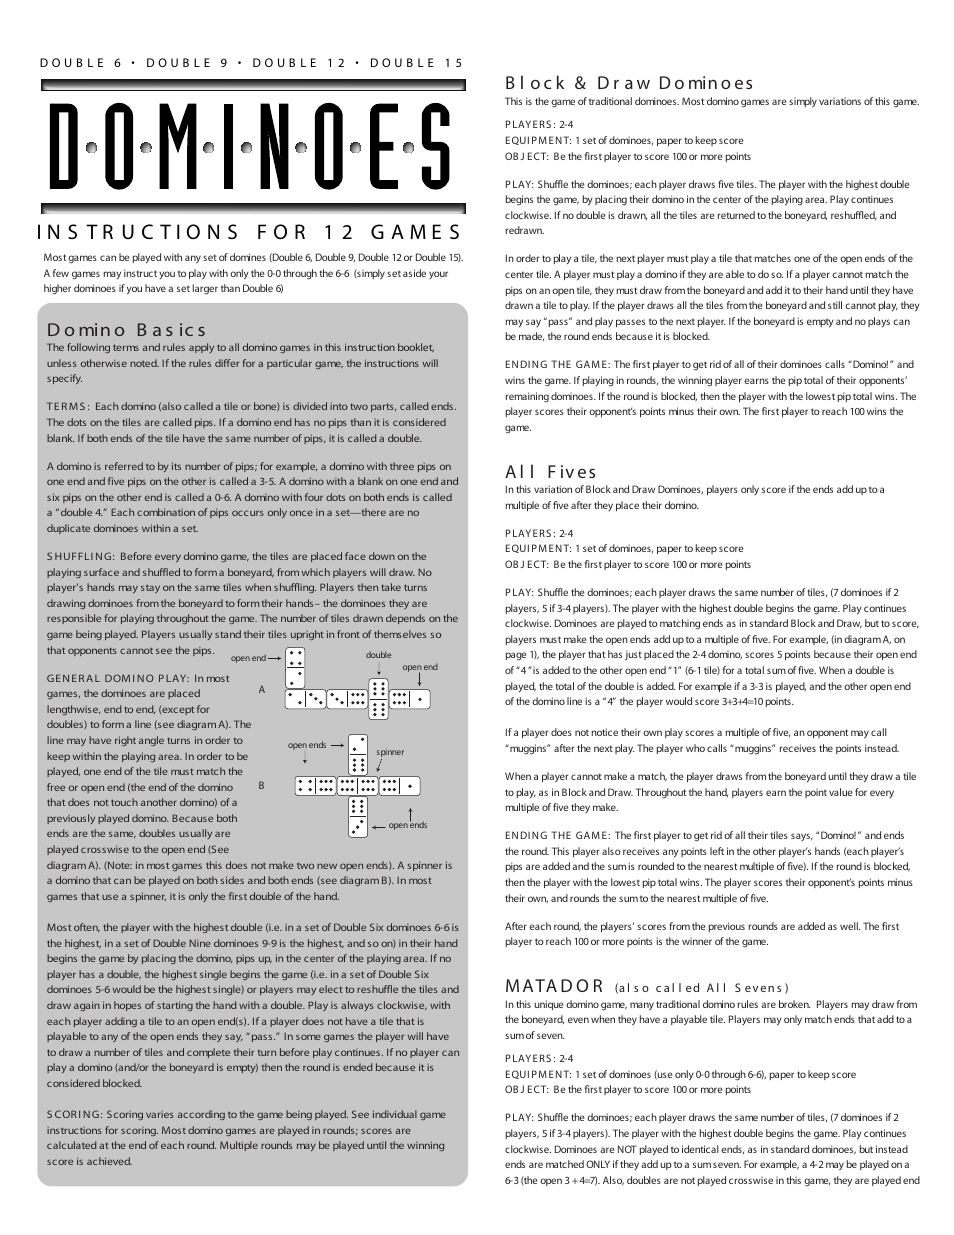 fundex-games-double-nine-dominoes-user-manual-3-pages